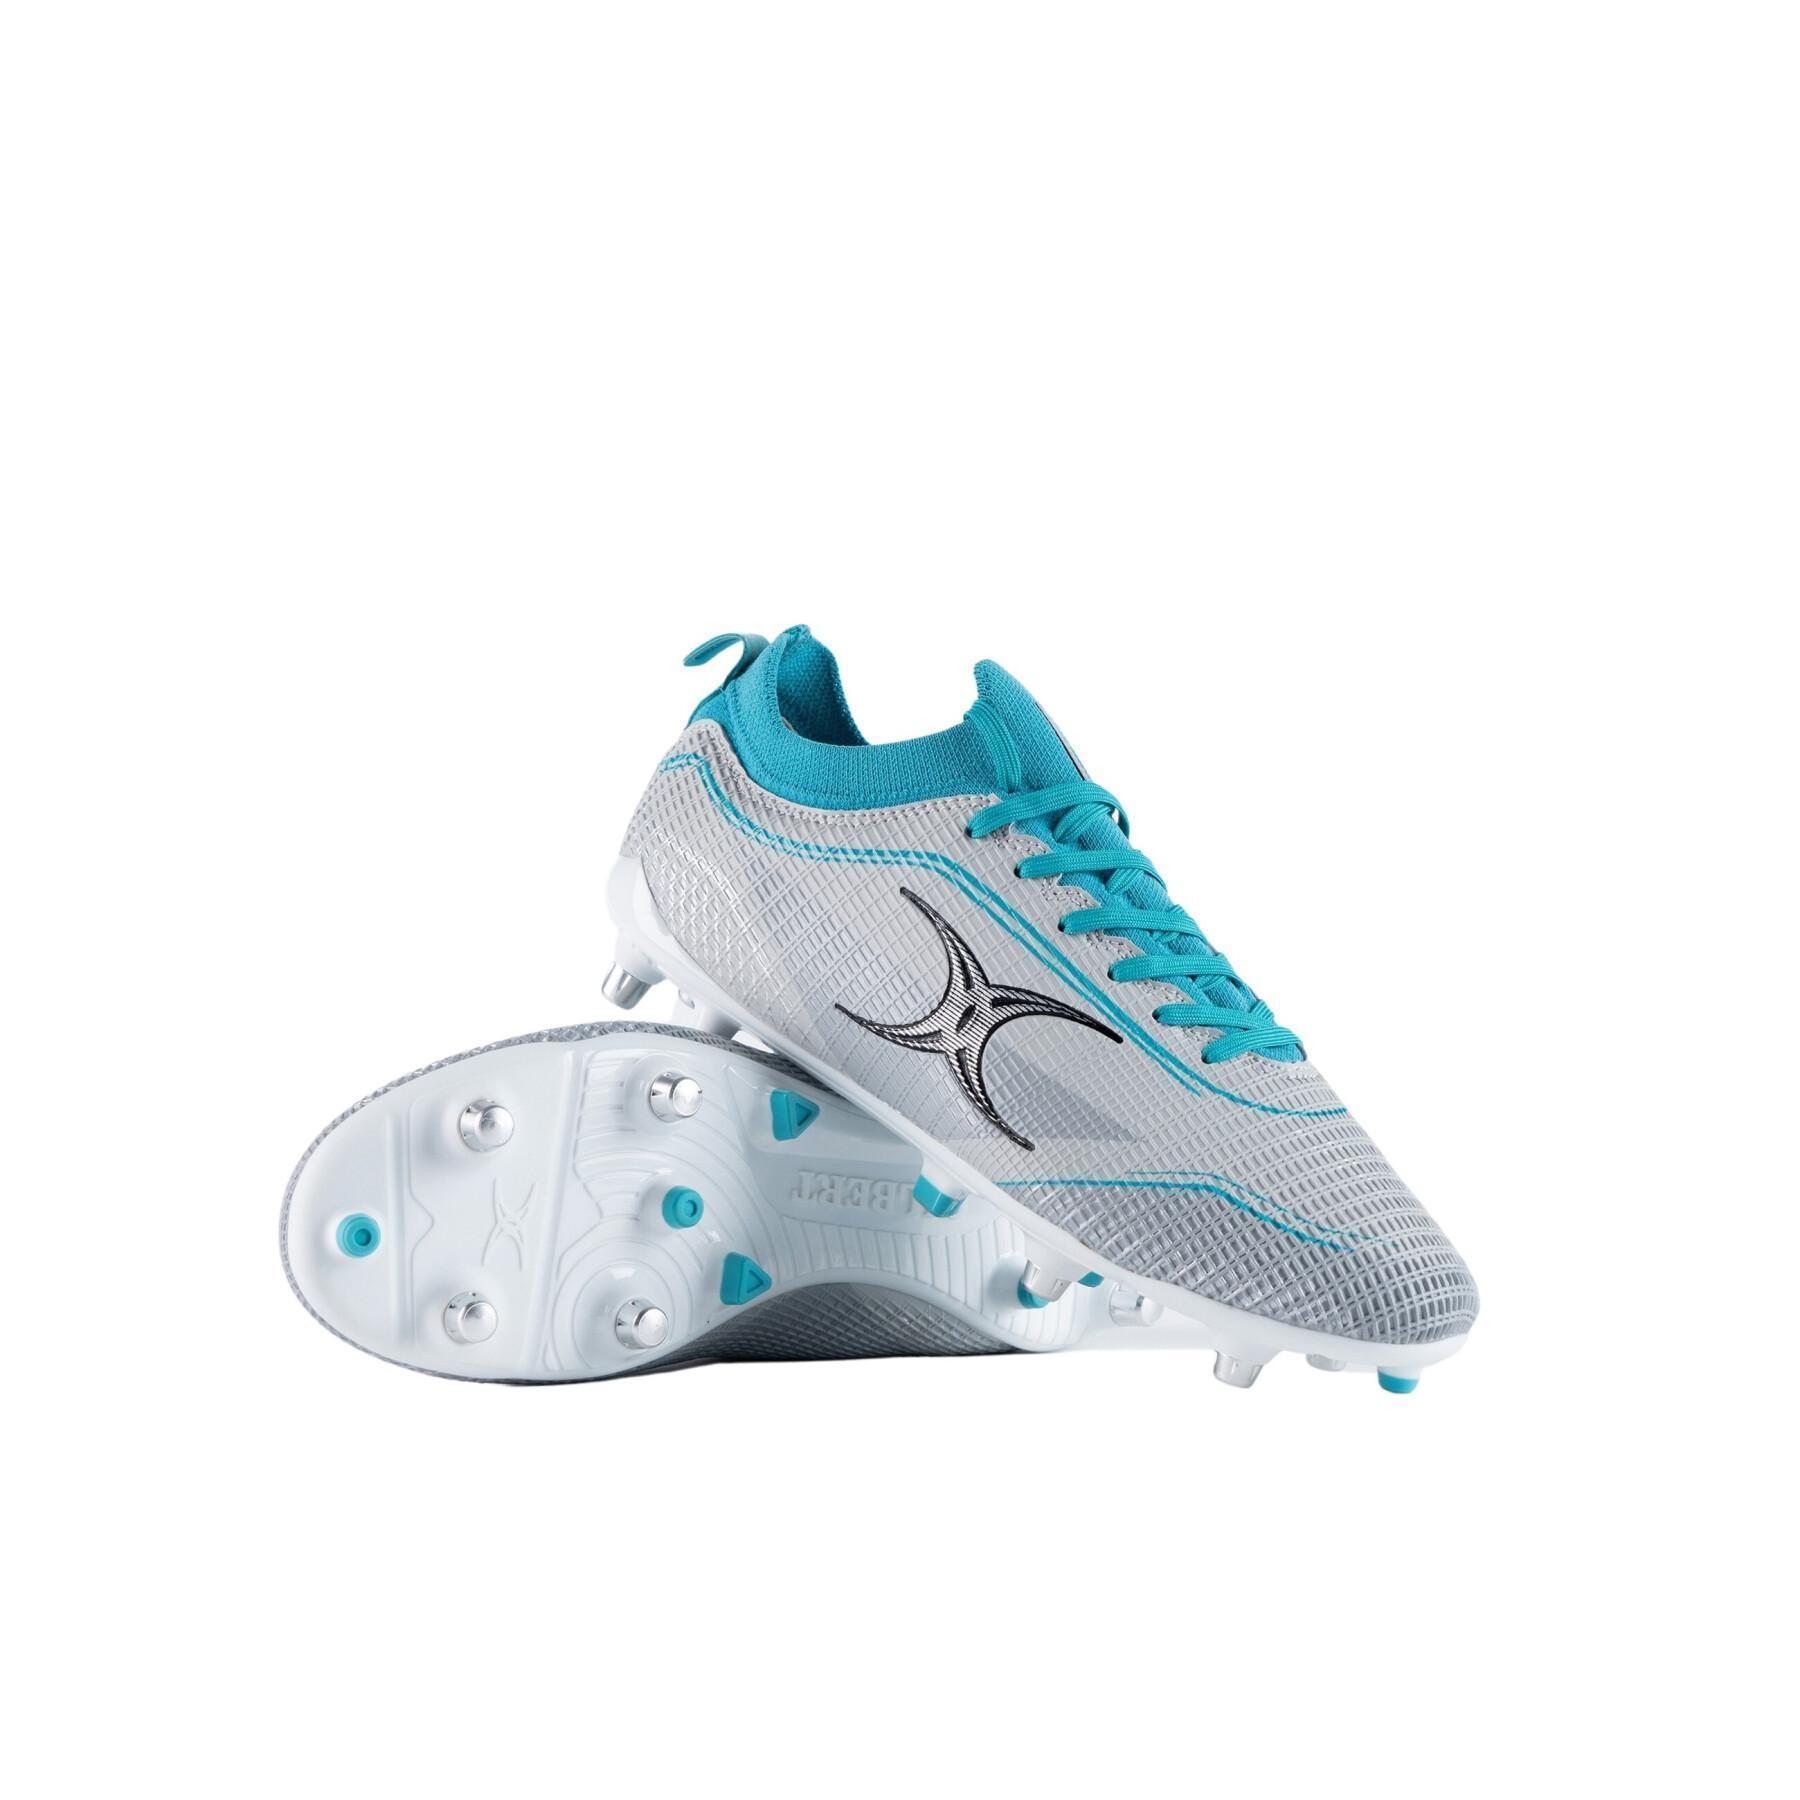 Rugby shoes Gilbert Cage Pace 6S